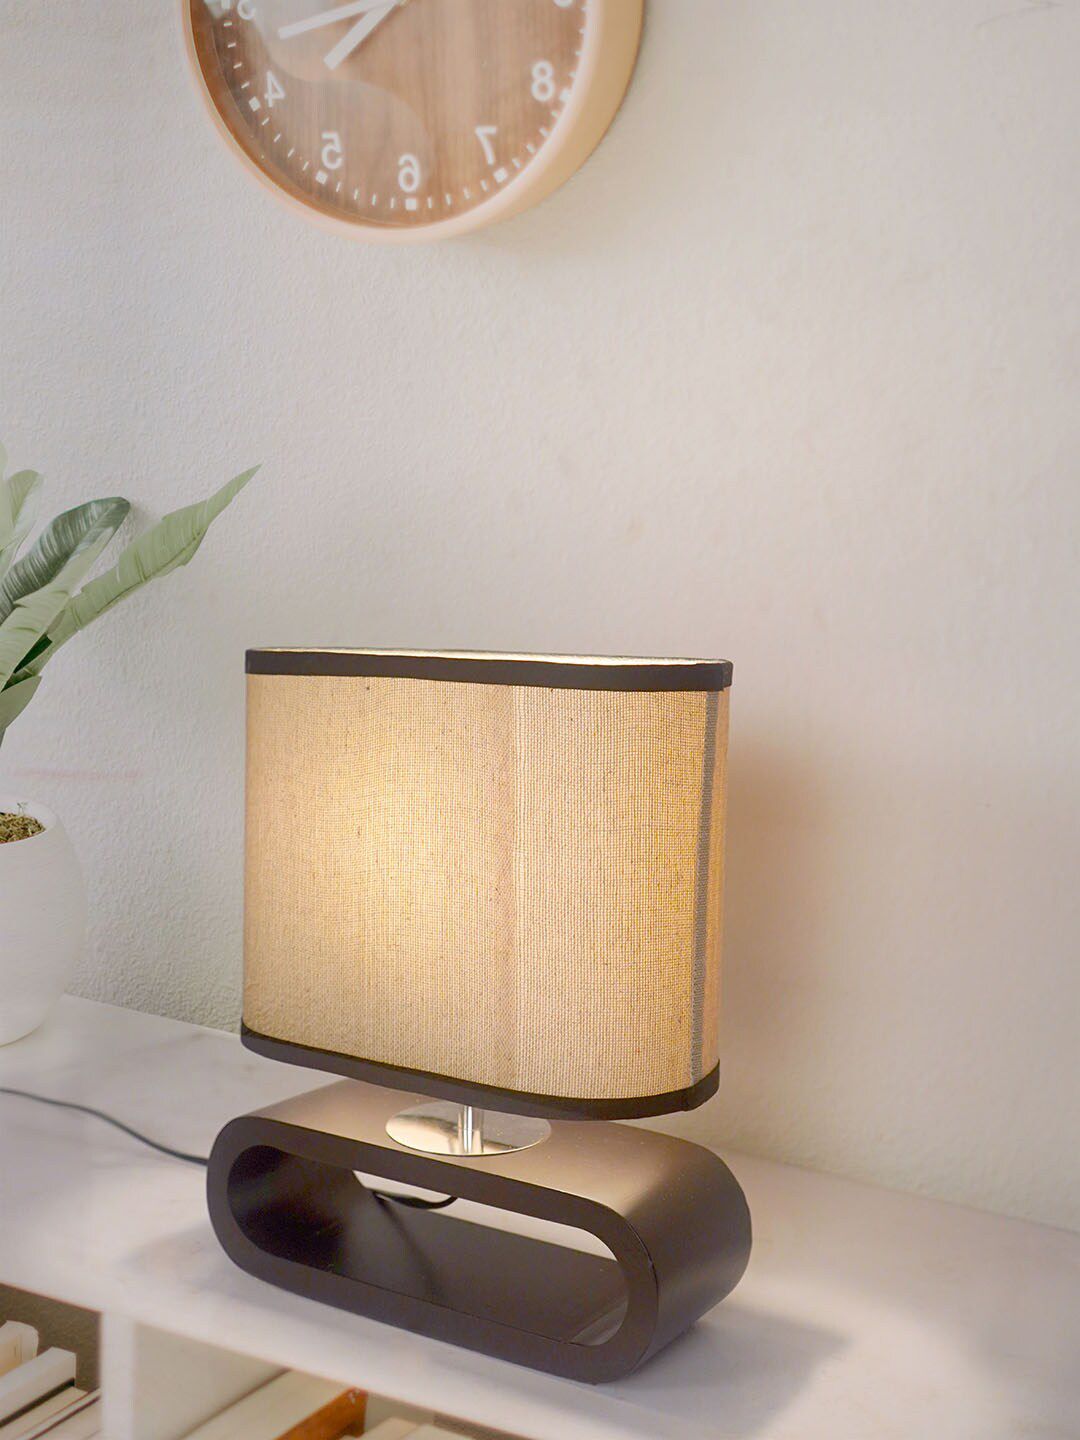 Fos Lighting Brown Solid Capsule Shaped Table Lamp Price in India